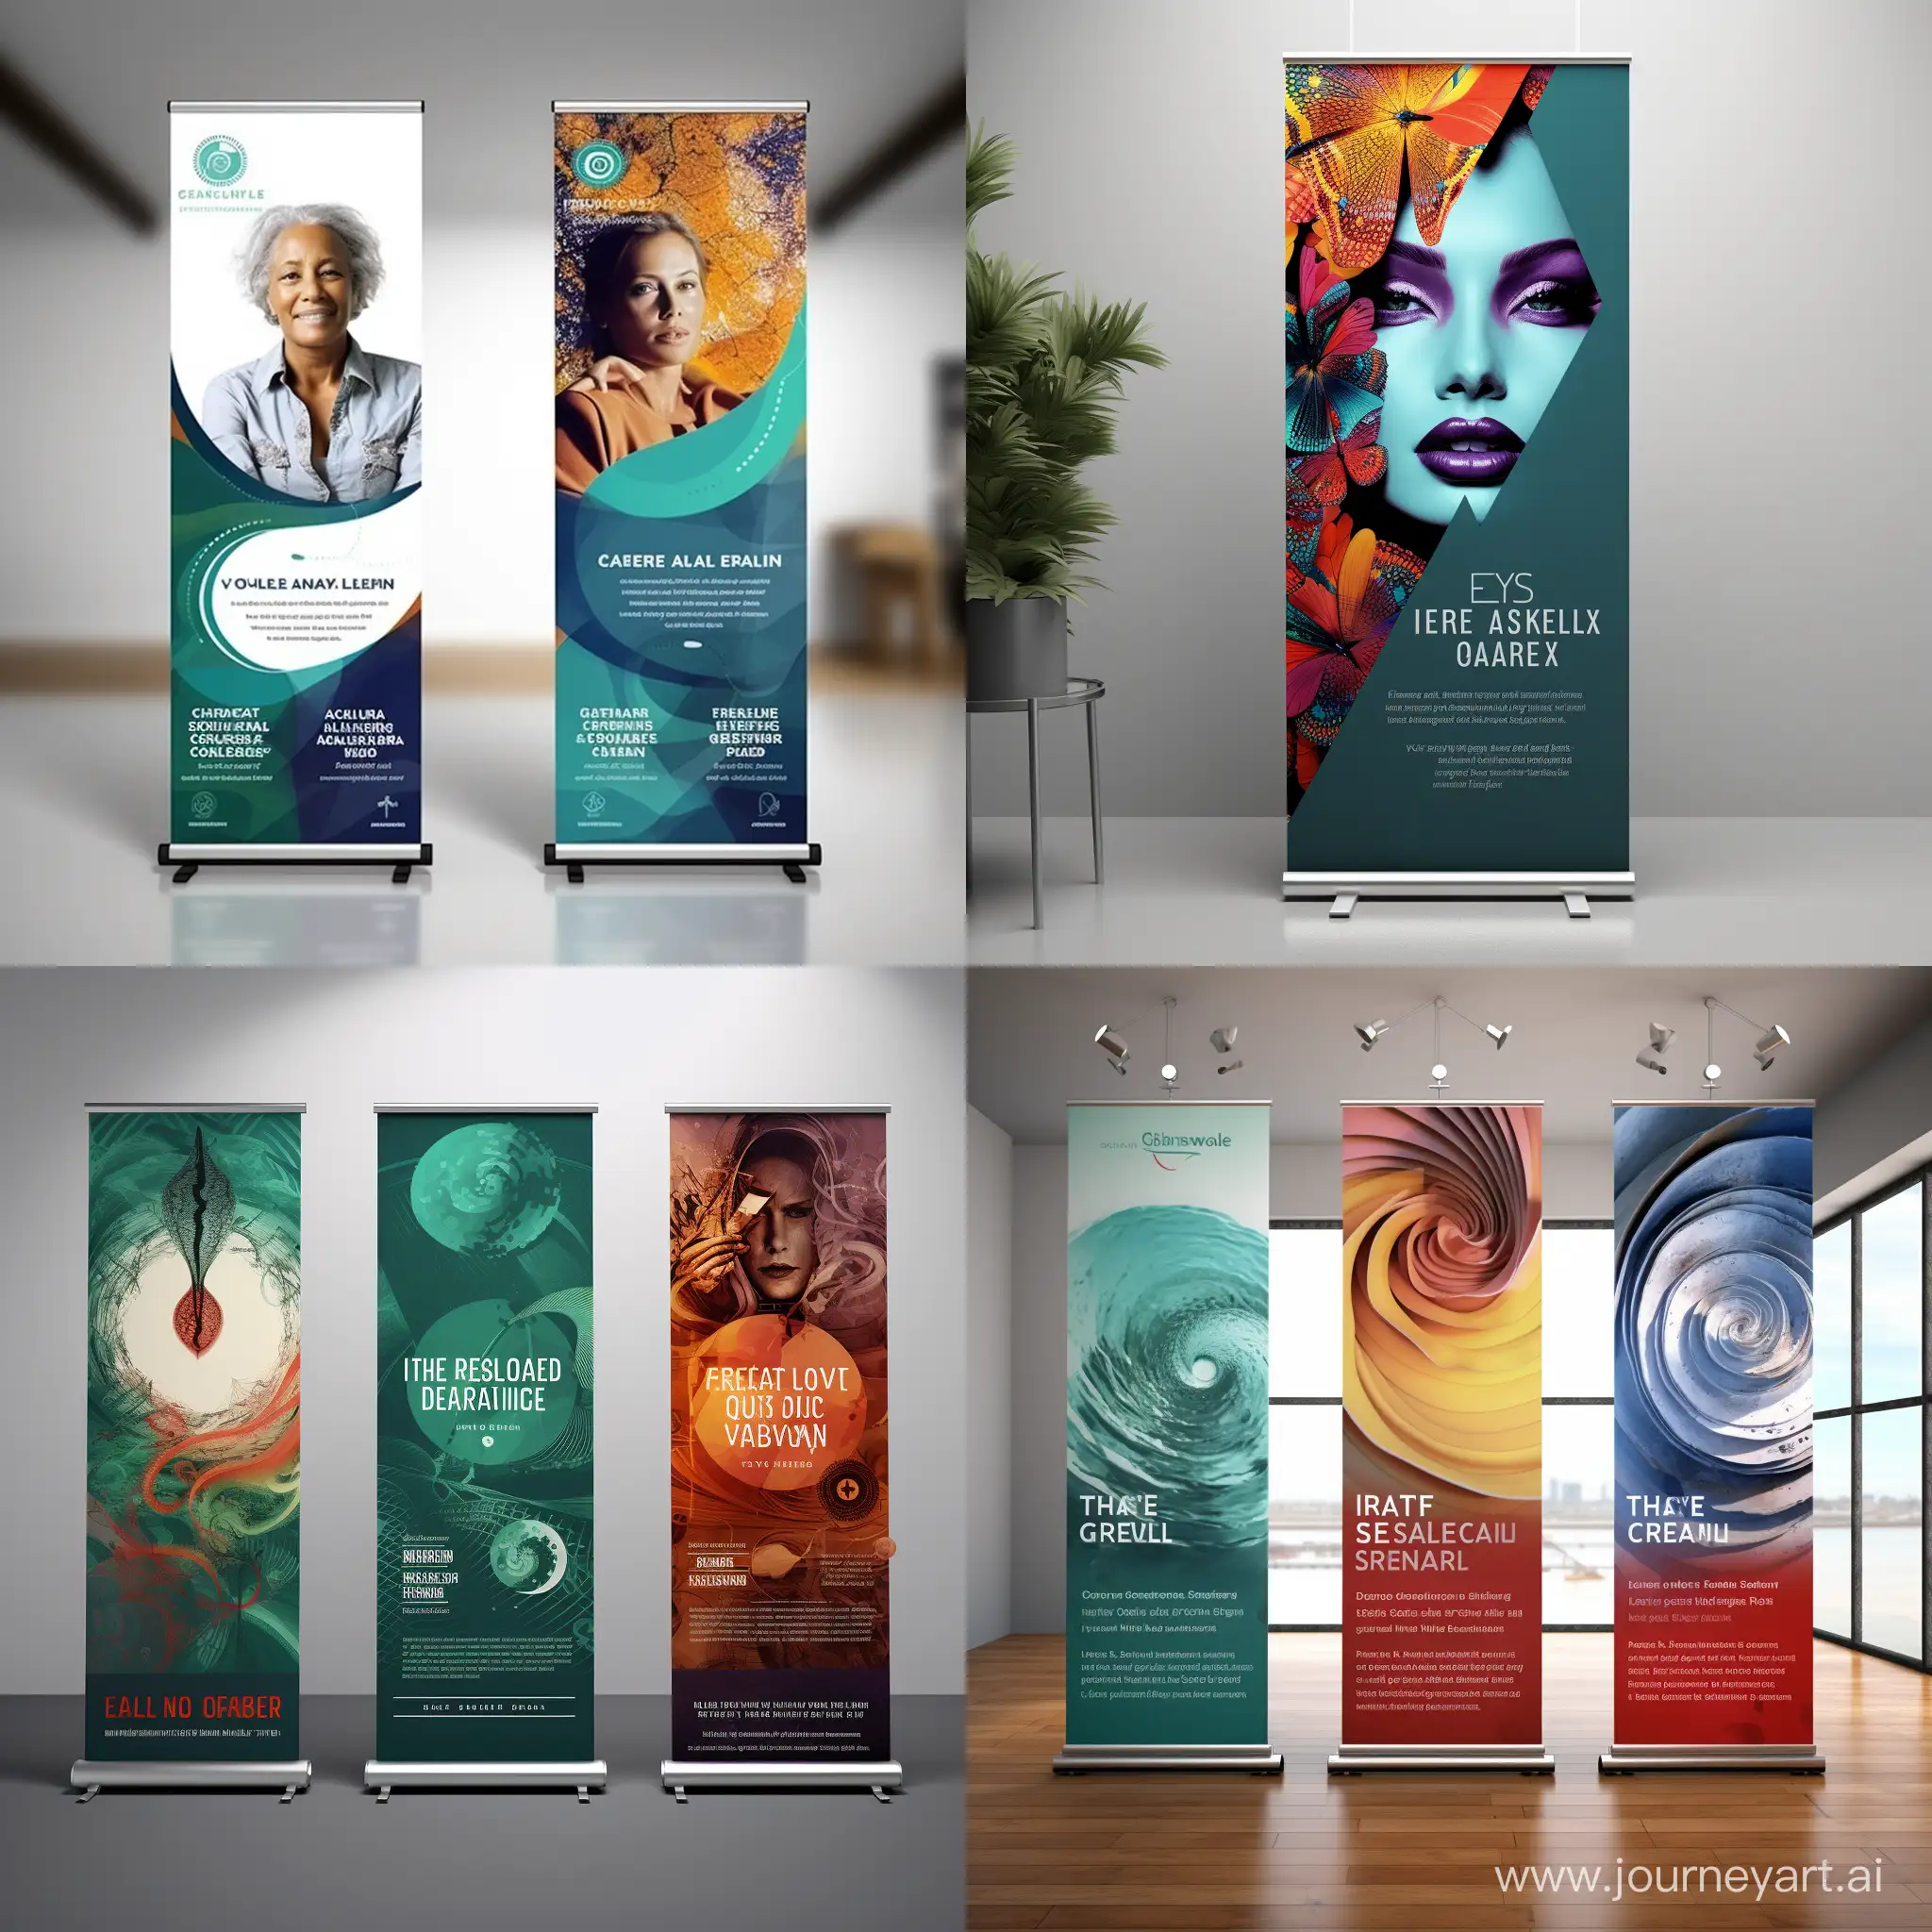 EyeCatching-Roll-Up-Banners-and-Retractable-Banners-Design-AR-11-No-6917